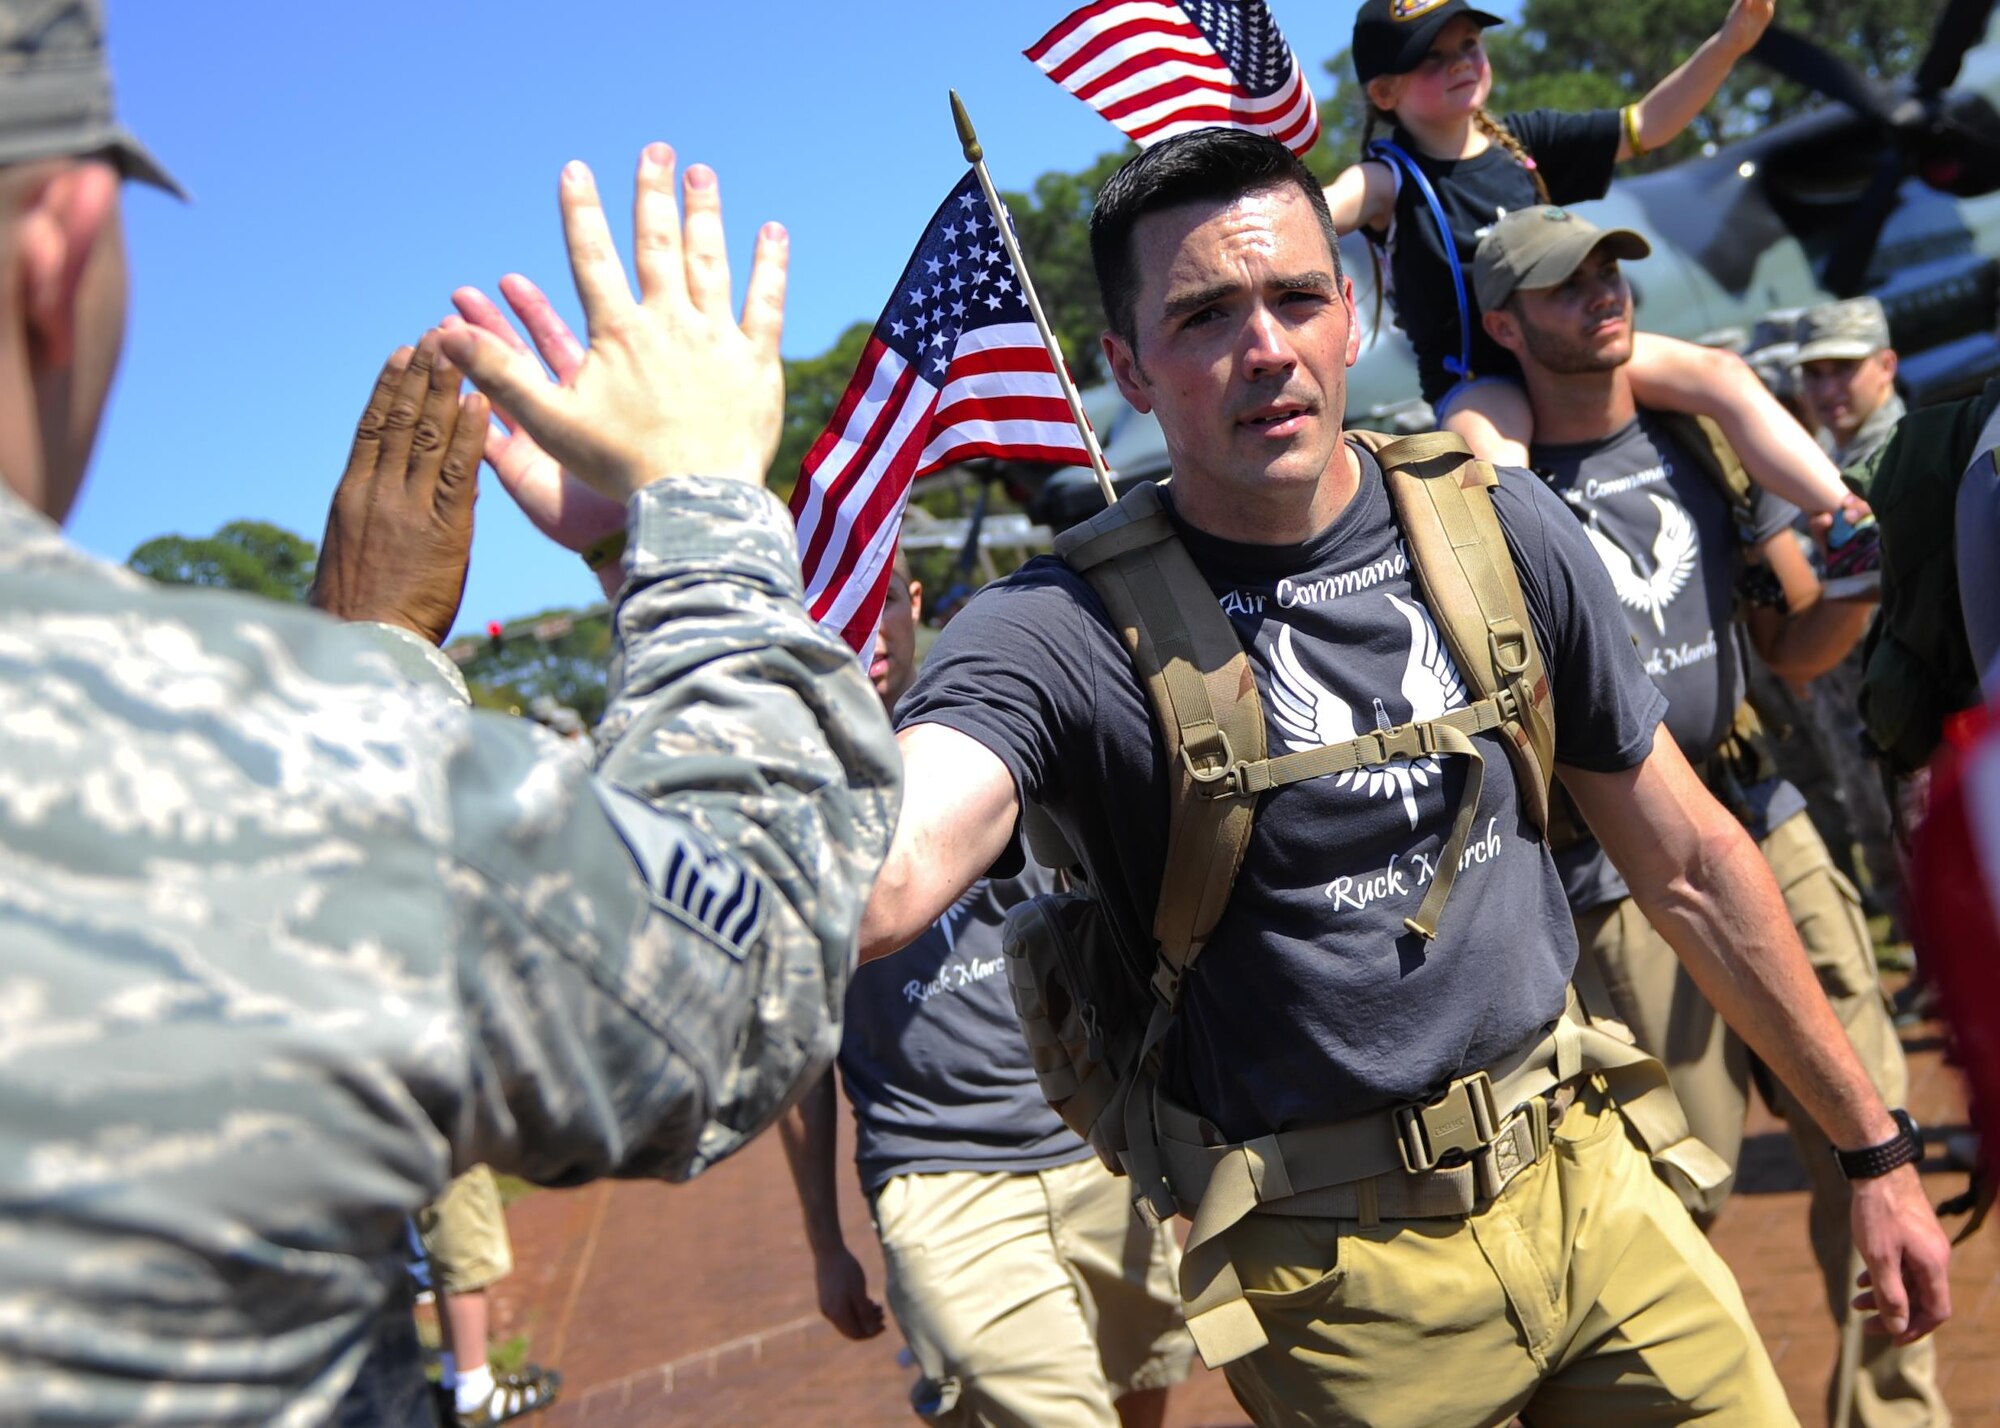 Tech. Sgt. Michael Dylan, 18th Flight Test Squadron, gives a high five at the end of a 450 mile ruck march that began at MacDill Air Force Base, Fla., on March 15, 2015 and ended at Hurlburt Field, Fla., March 20, 2015. The 11 Air Commandos carried flags with the names of the seven fallen Special Operations Command members and four Army National Guard air crew members that lost their lives during a training mission, March 10, 2015. (U.S. Air Force photo/Senior Airman Christopher Callaway/Released)